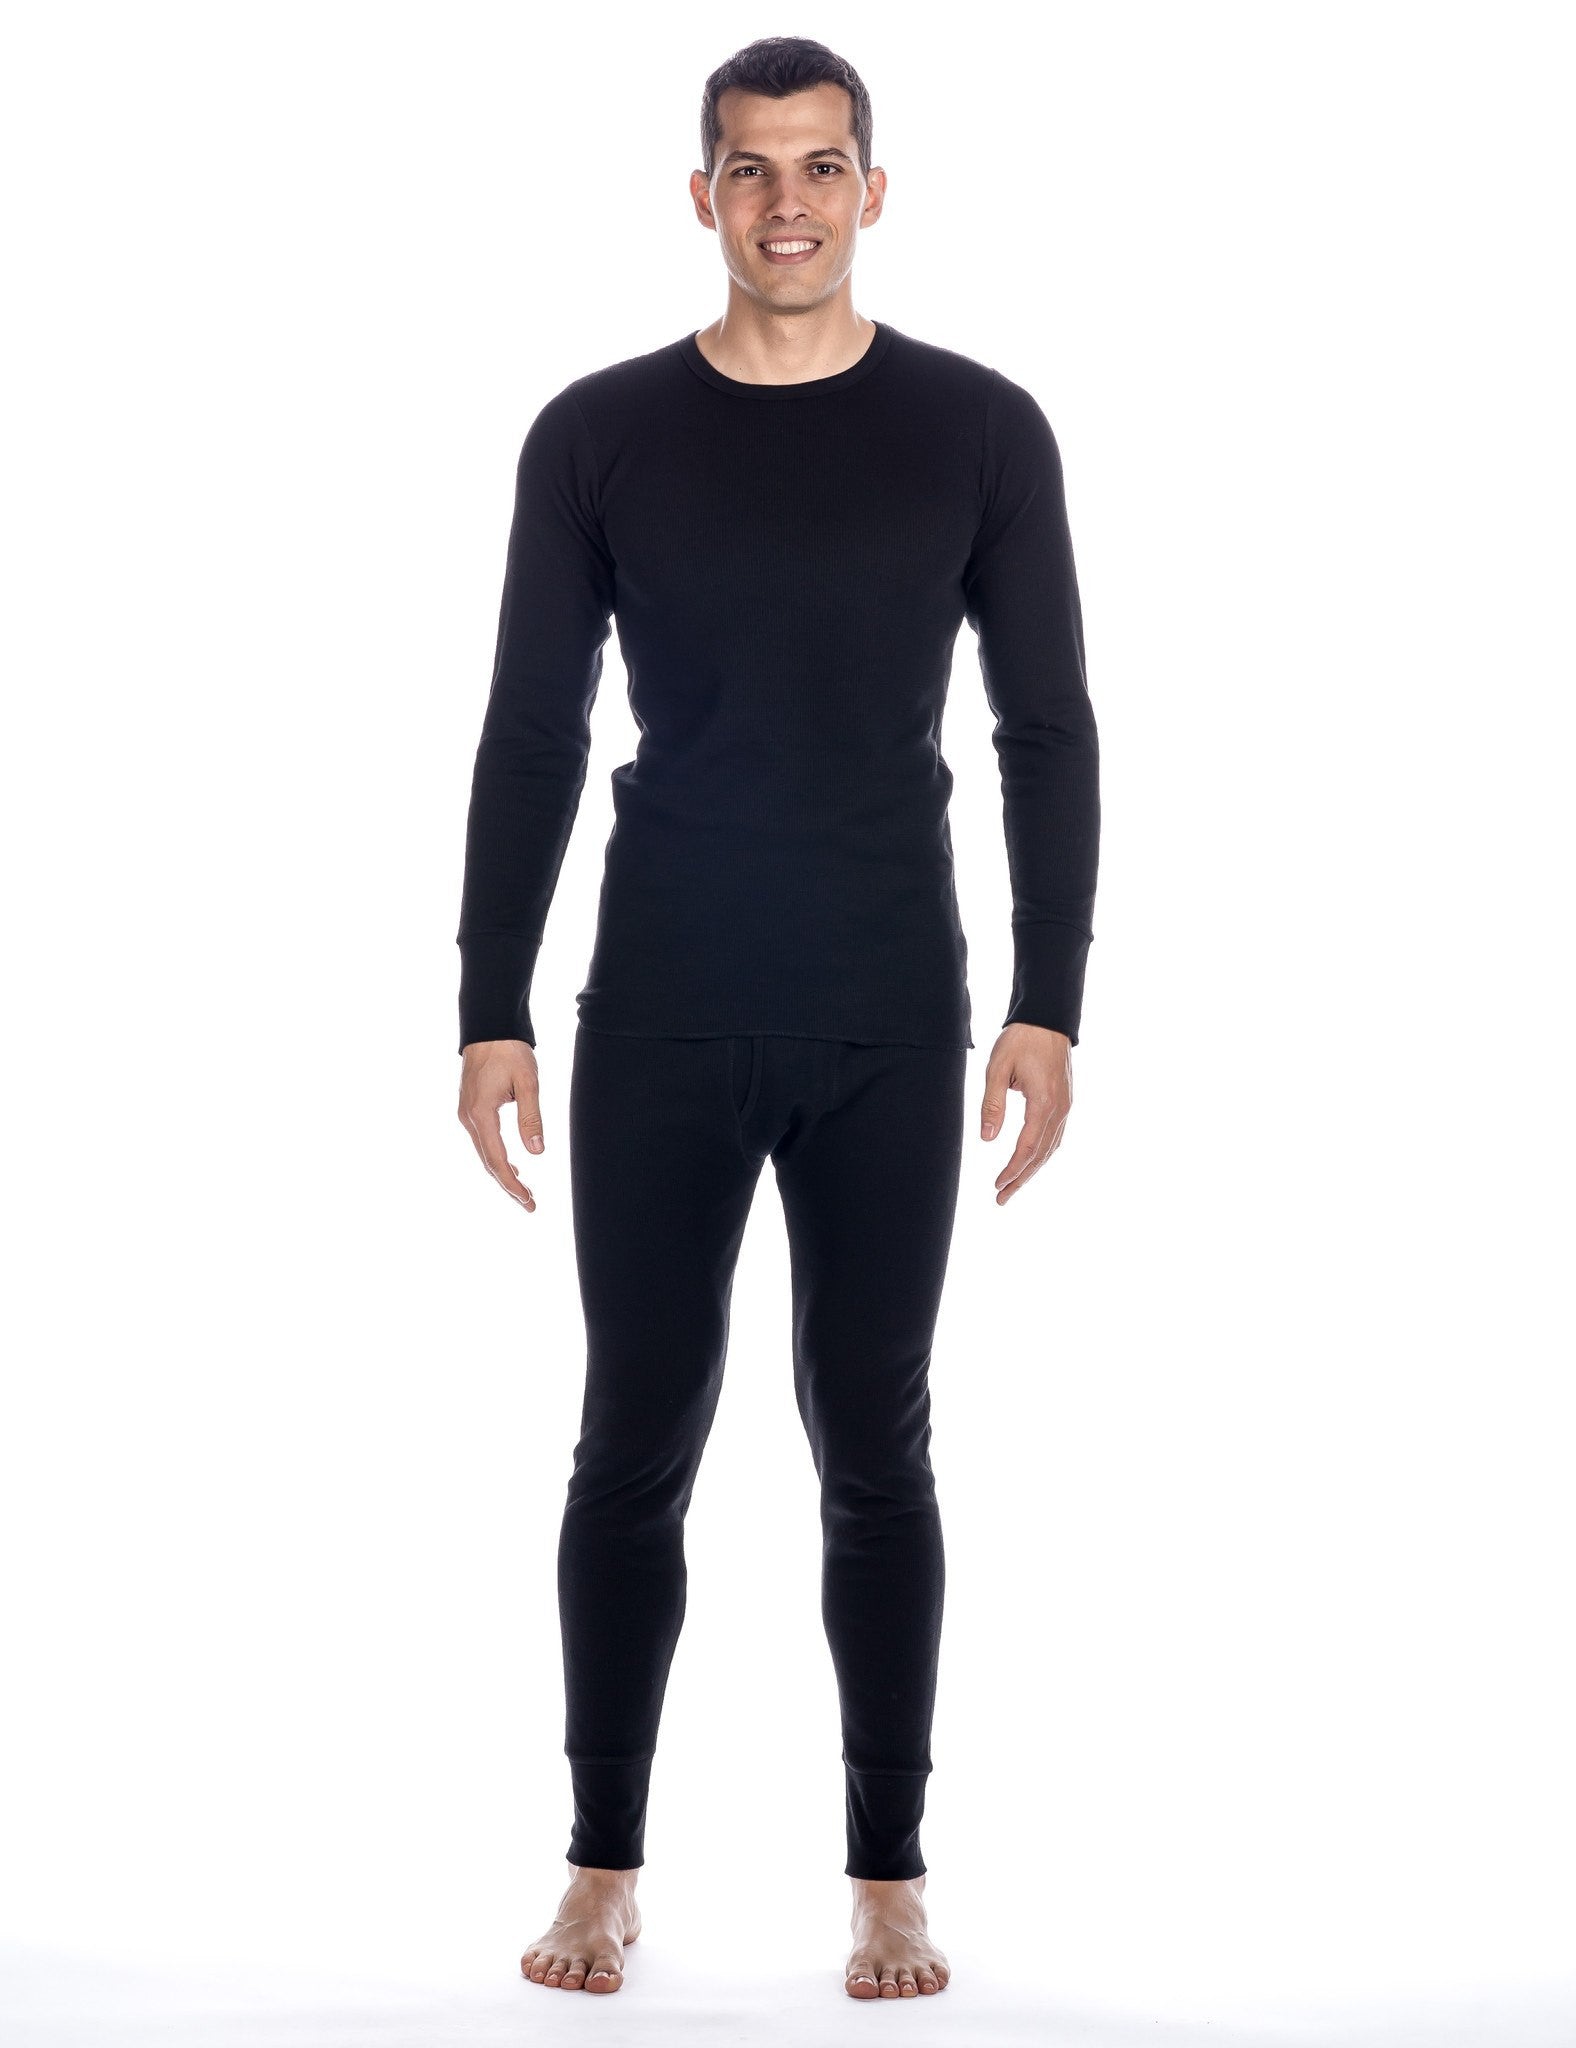 Noble Mount Men's Extreme Cold Thermal Top & Bottom Set